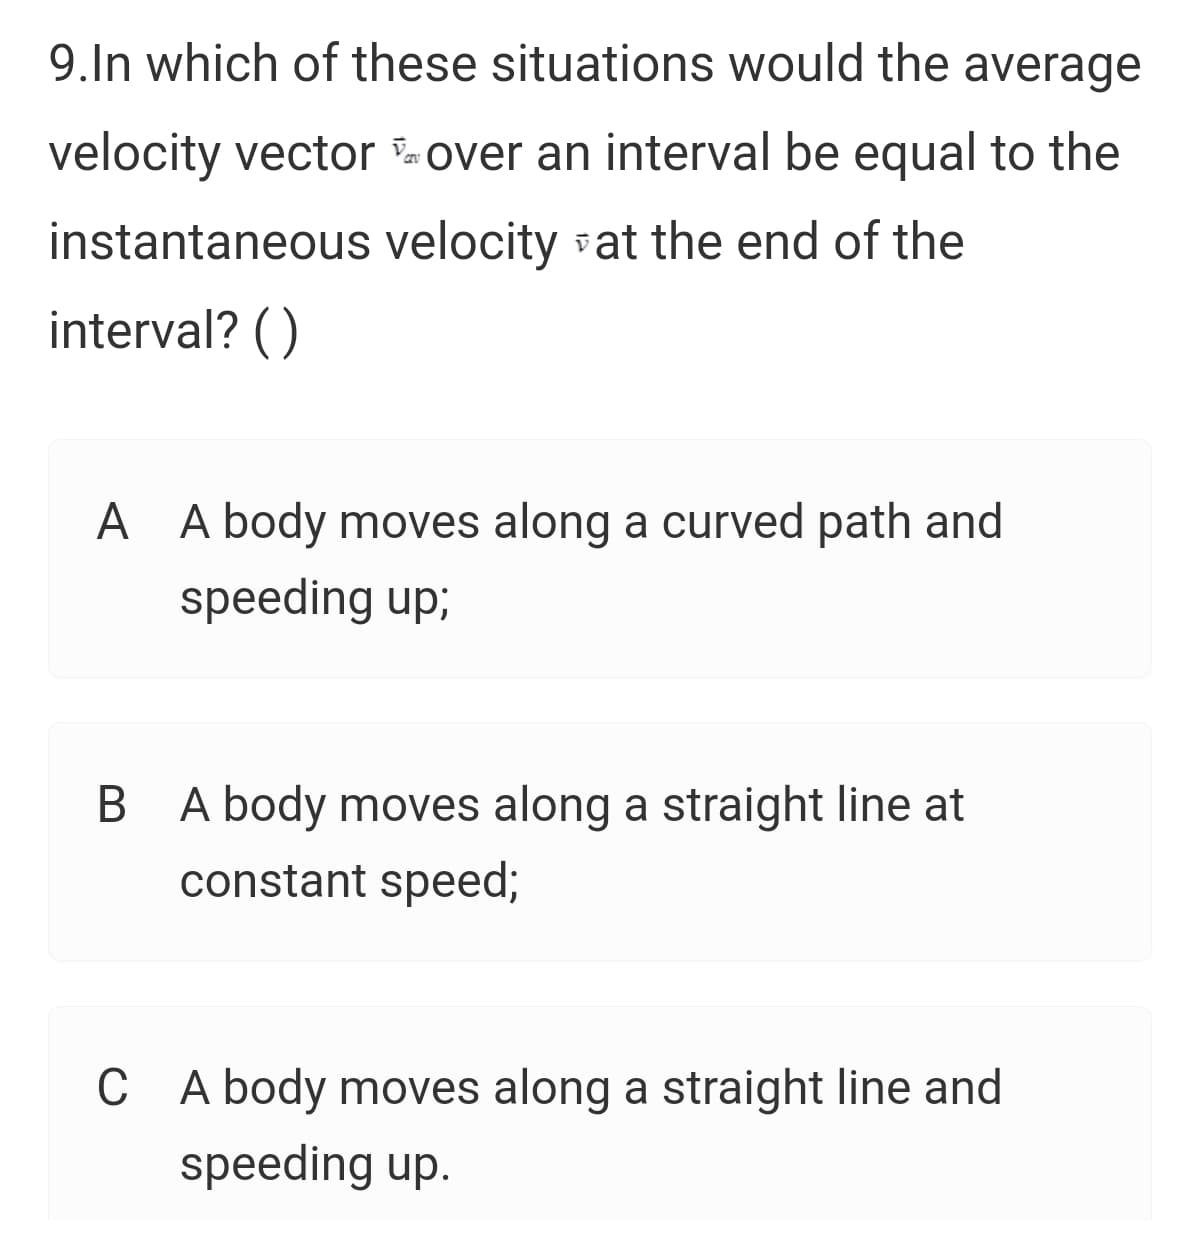 9.In which of these situations would the average
velocity vector over an interval be equal to the
instantaneous velocity vat the end of the
interval? ()
A A body moves along a curved path and
speeding up;
B A body moves along a straight line at
constant speed;
C A body moves along a straight line and
speeding up.
